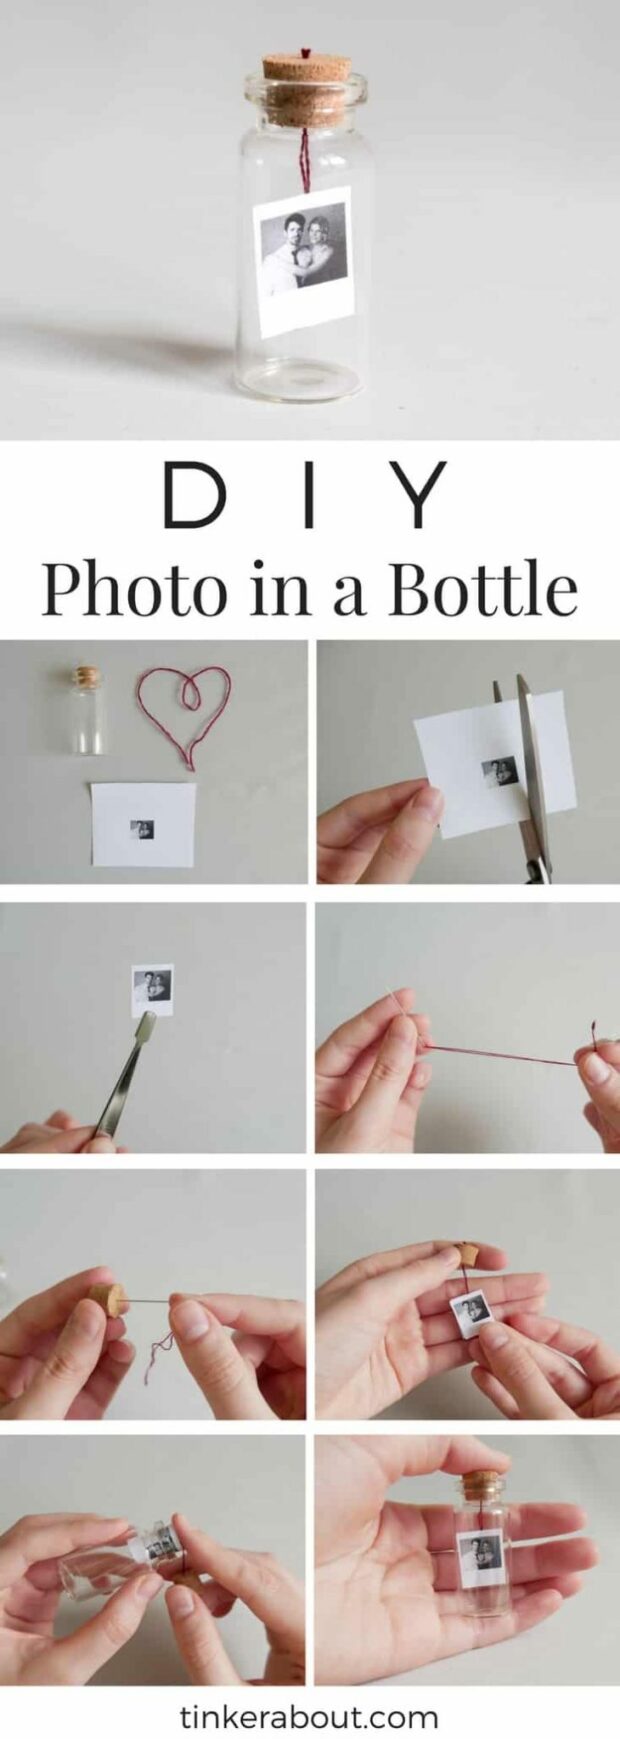 15 Valentine's Day Gifts You Can Make - Valentine's Day Gifts You Can Make, Valentine's day gifts, diy Valentine's day gifts for him, diy Valentine's day gifts for her, diy Valentine's day gifts